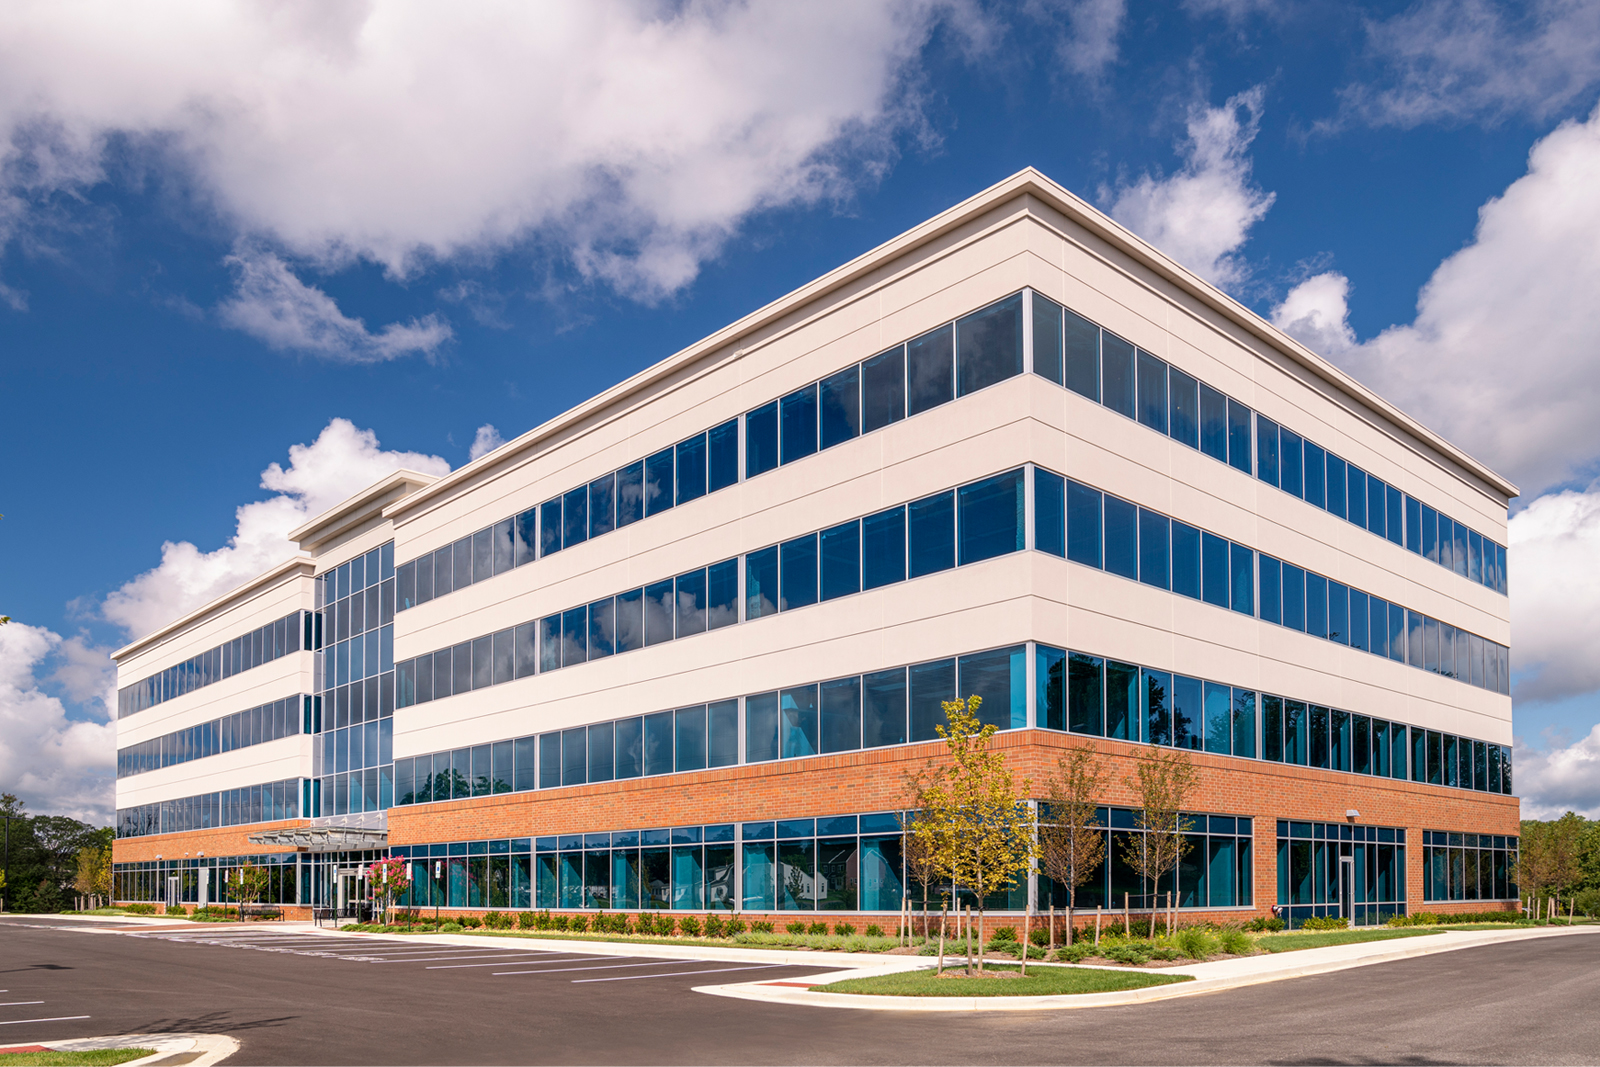 810 Bestgate Road | 4-story Class ‘A’ office building